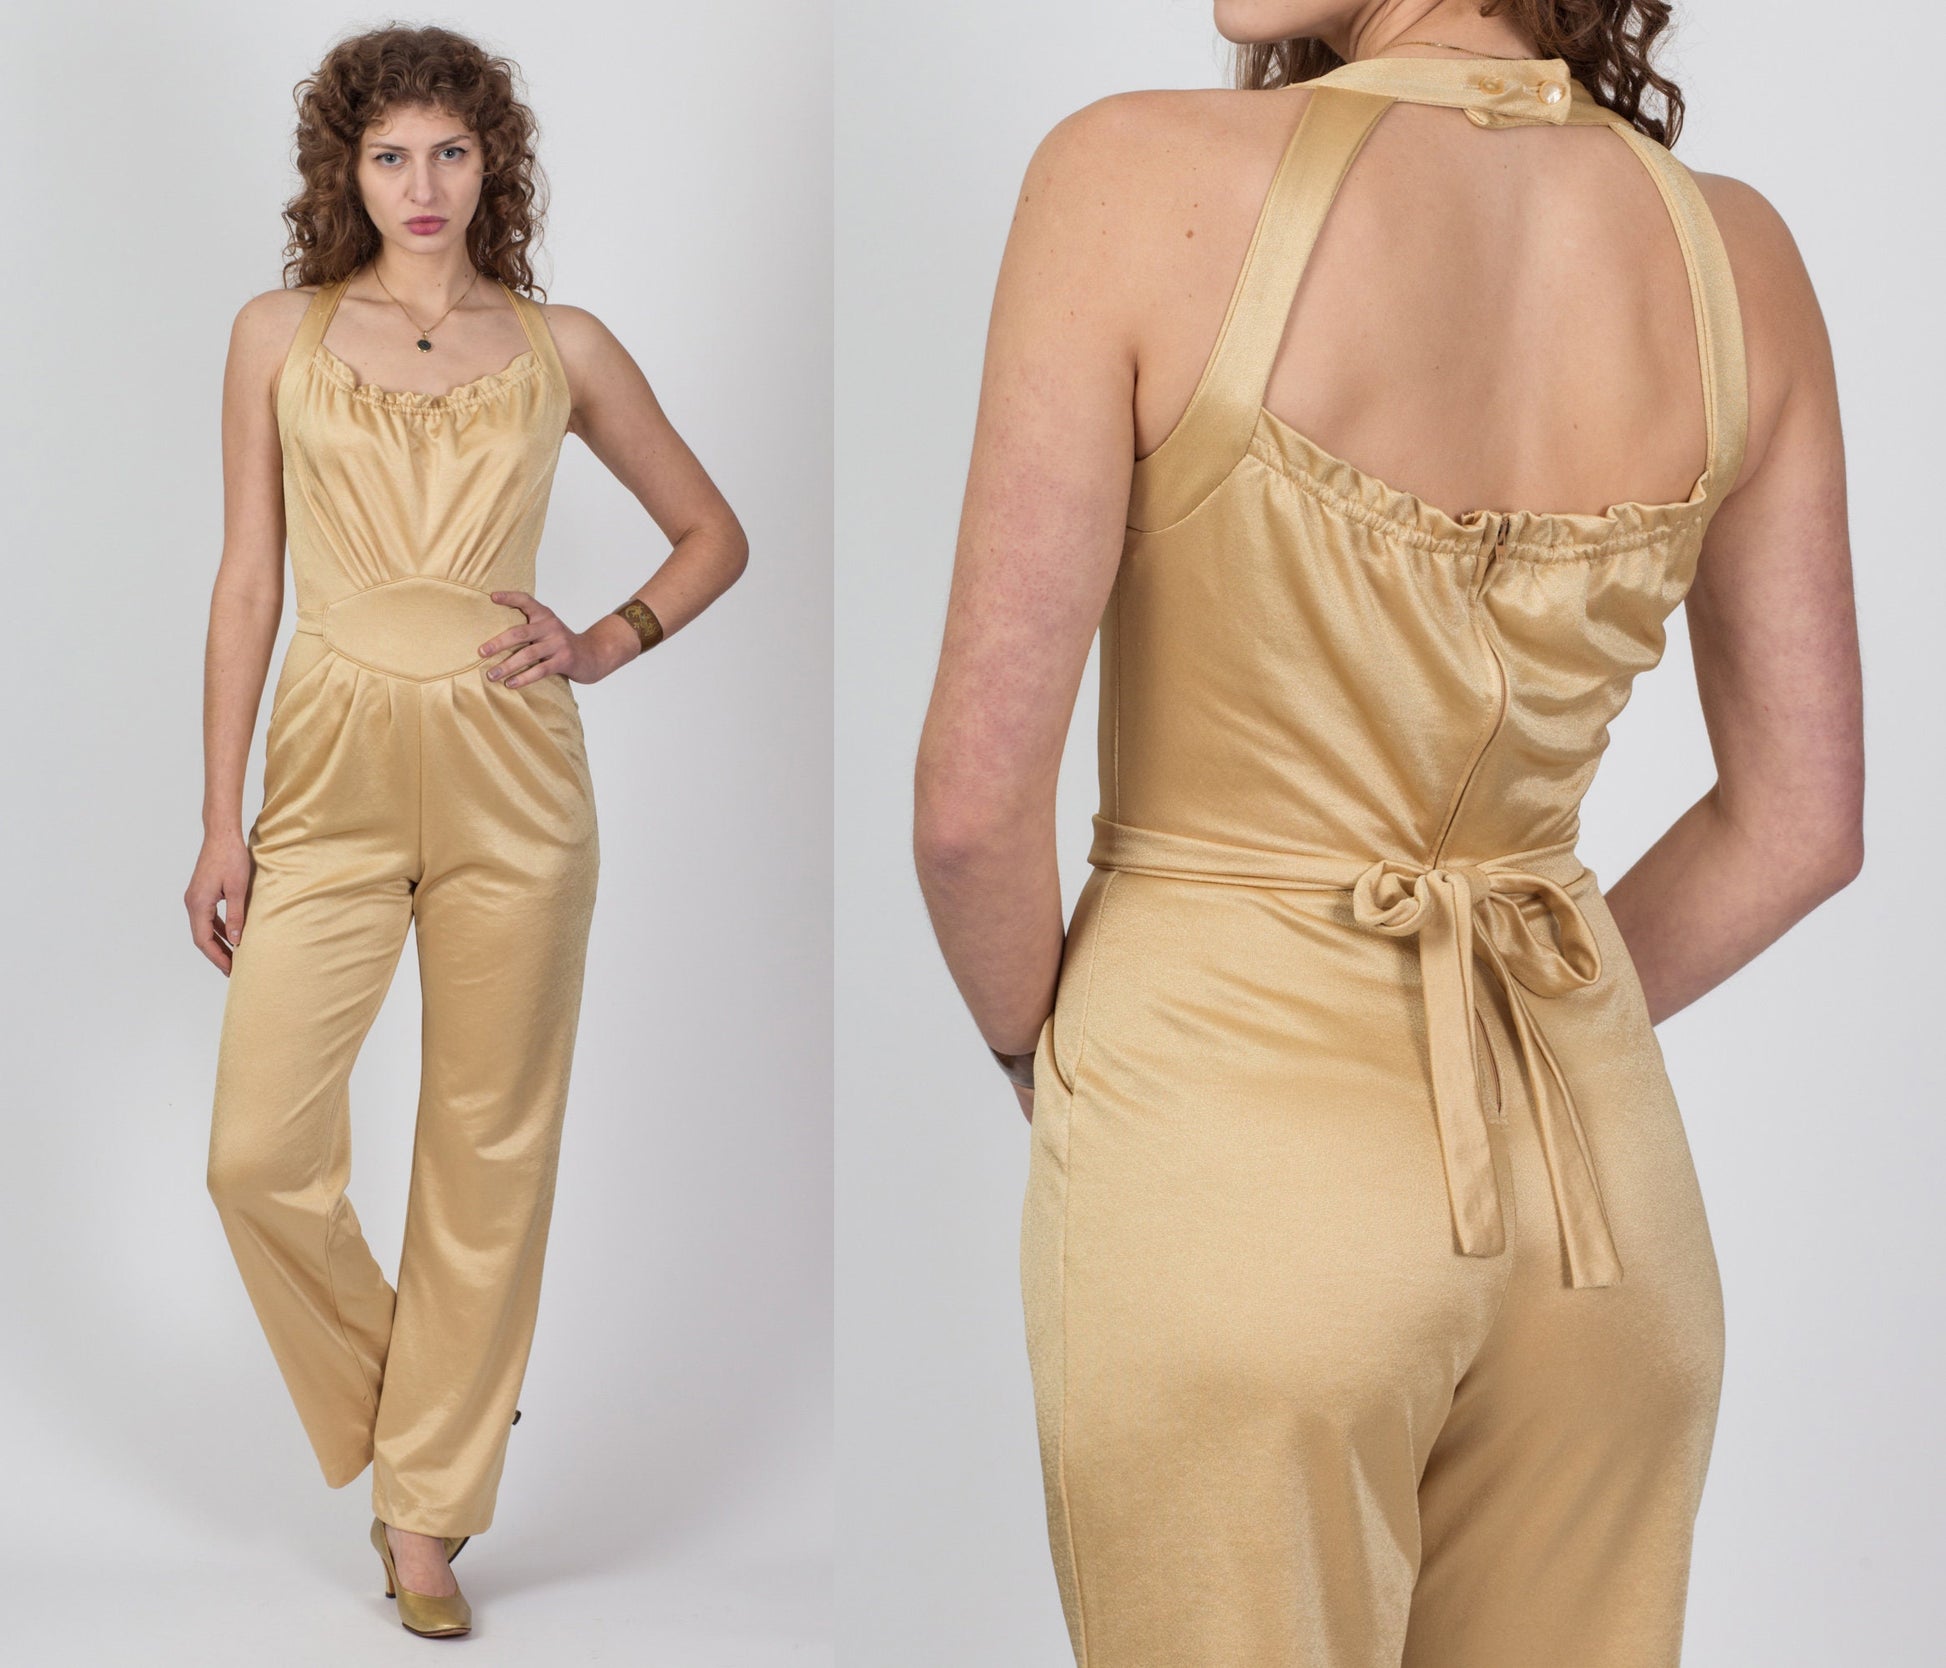 70s Liquid Gold Frederick's Of Hollywood Jumpsuit - Small to Medium 